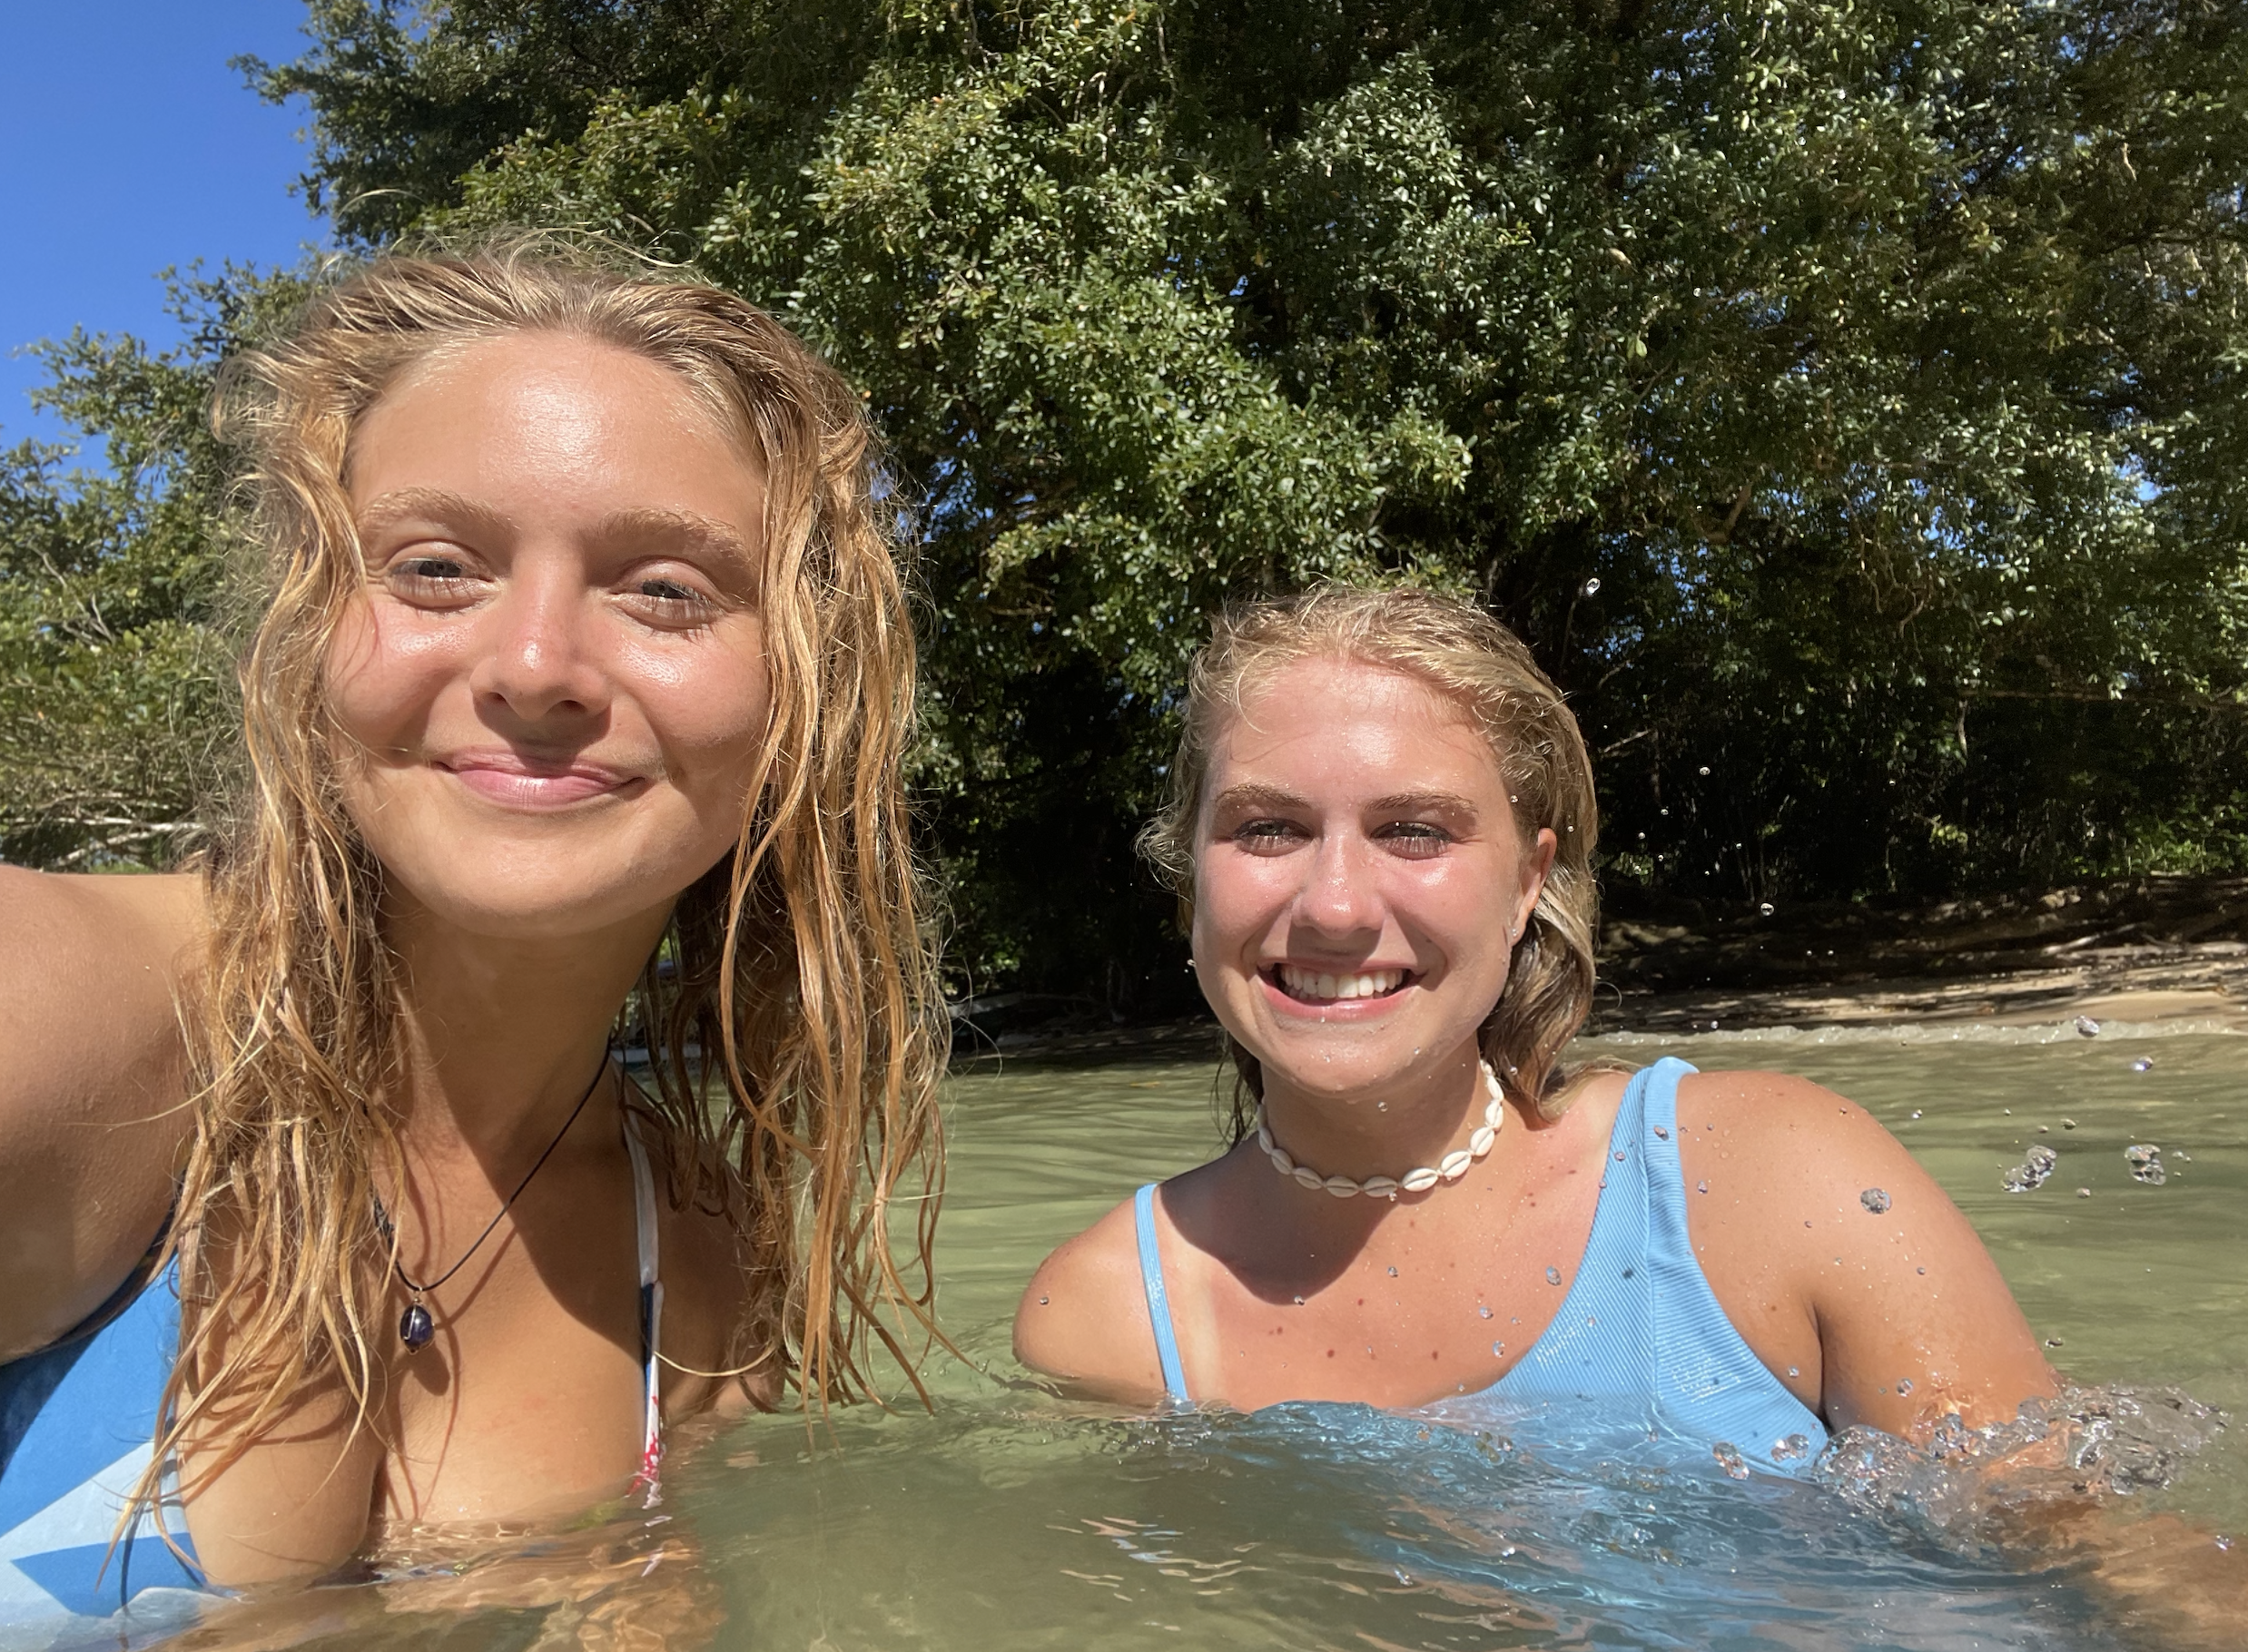 My friend and I swimming at a private cove which was a 10 minute boat ride away from our center